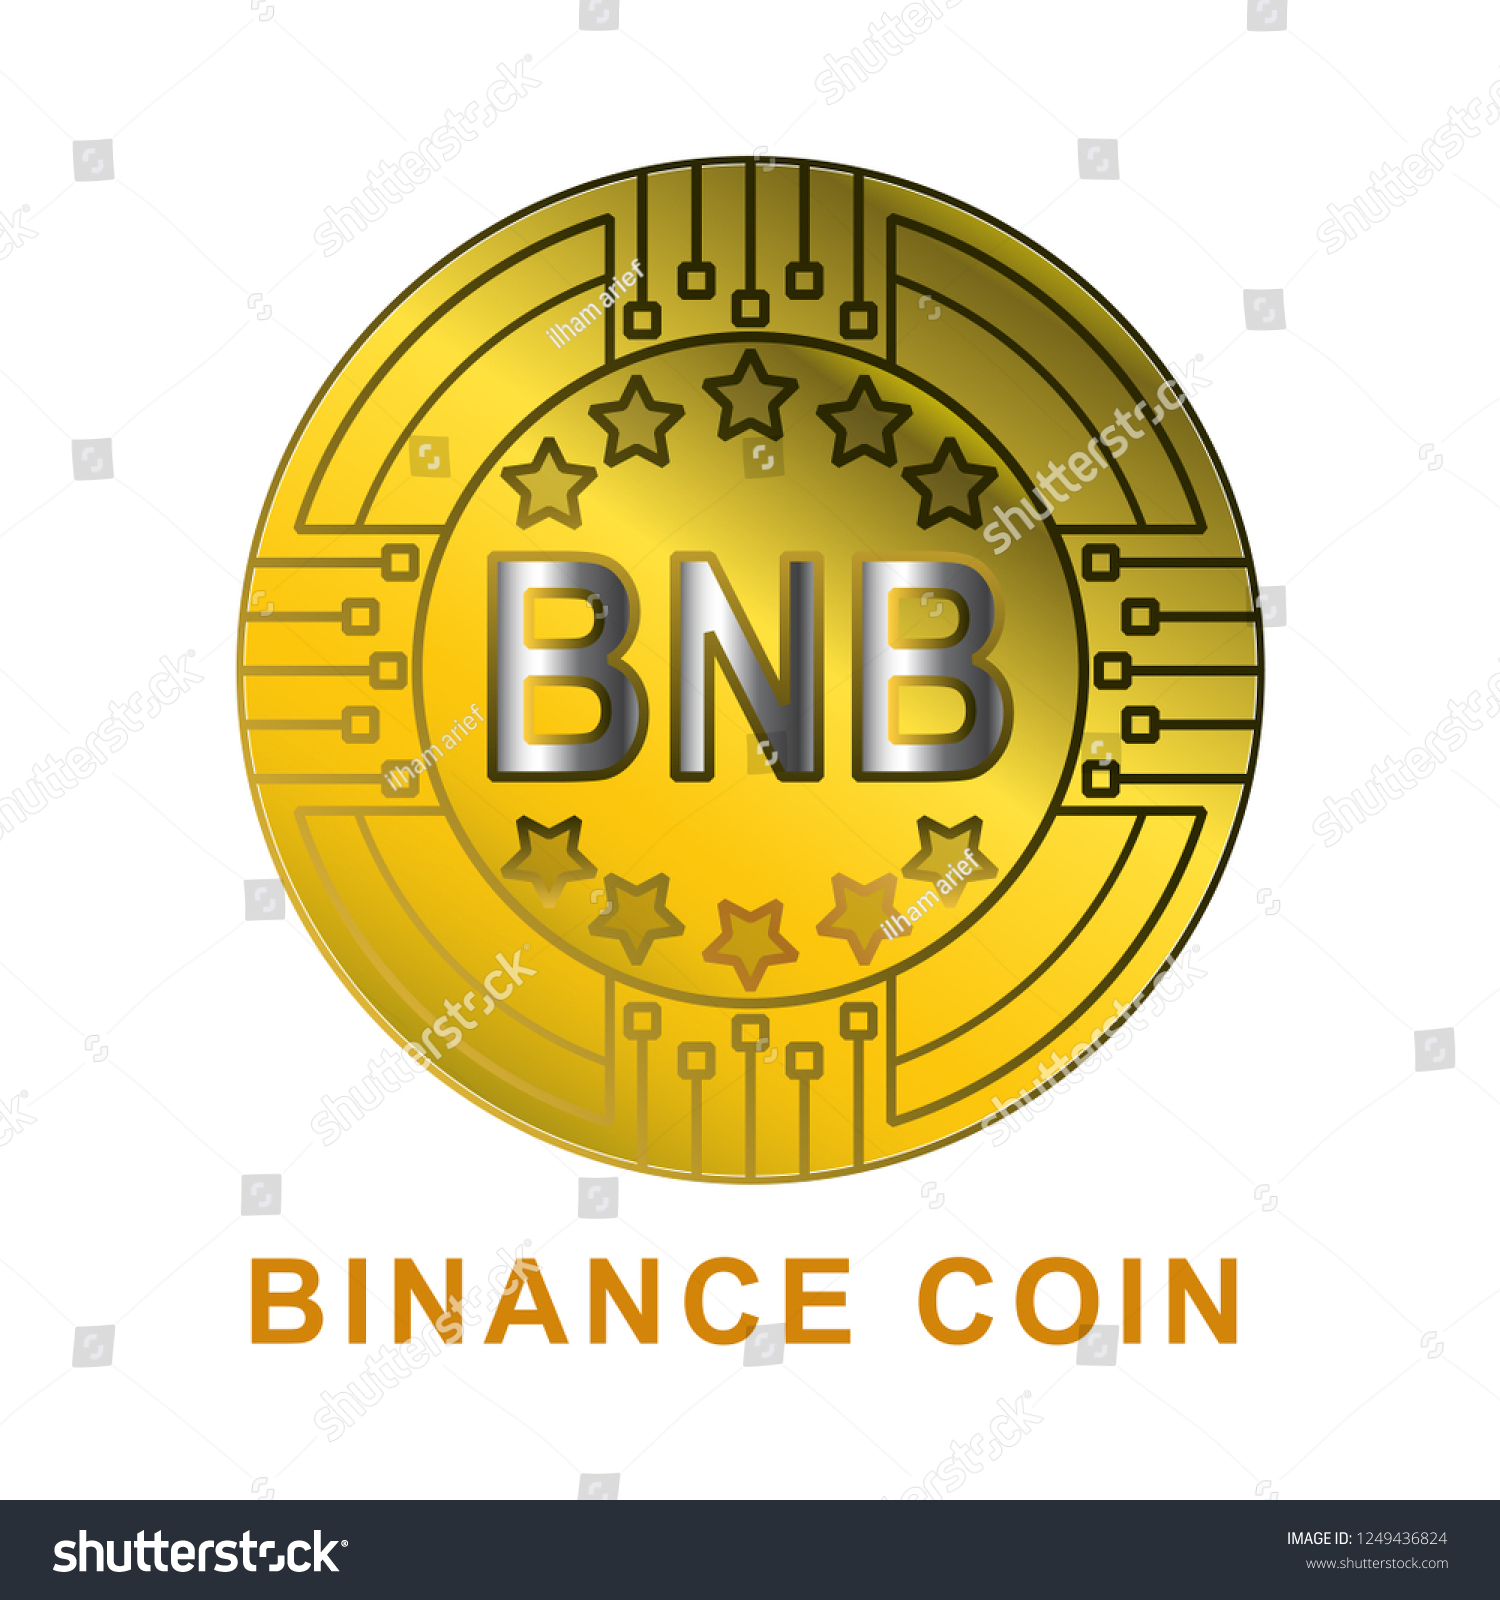 SVG of binance coin with gold color svg